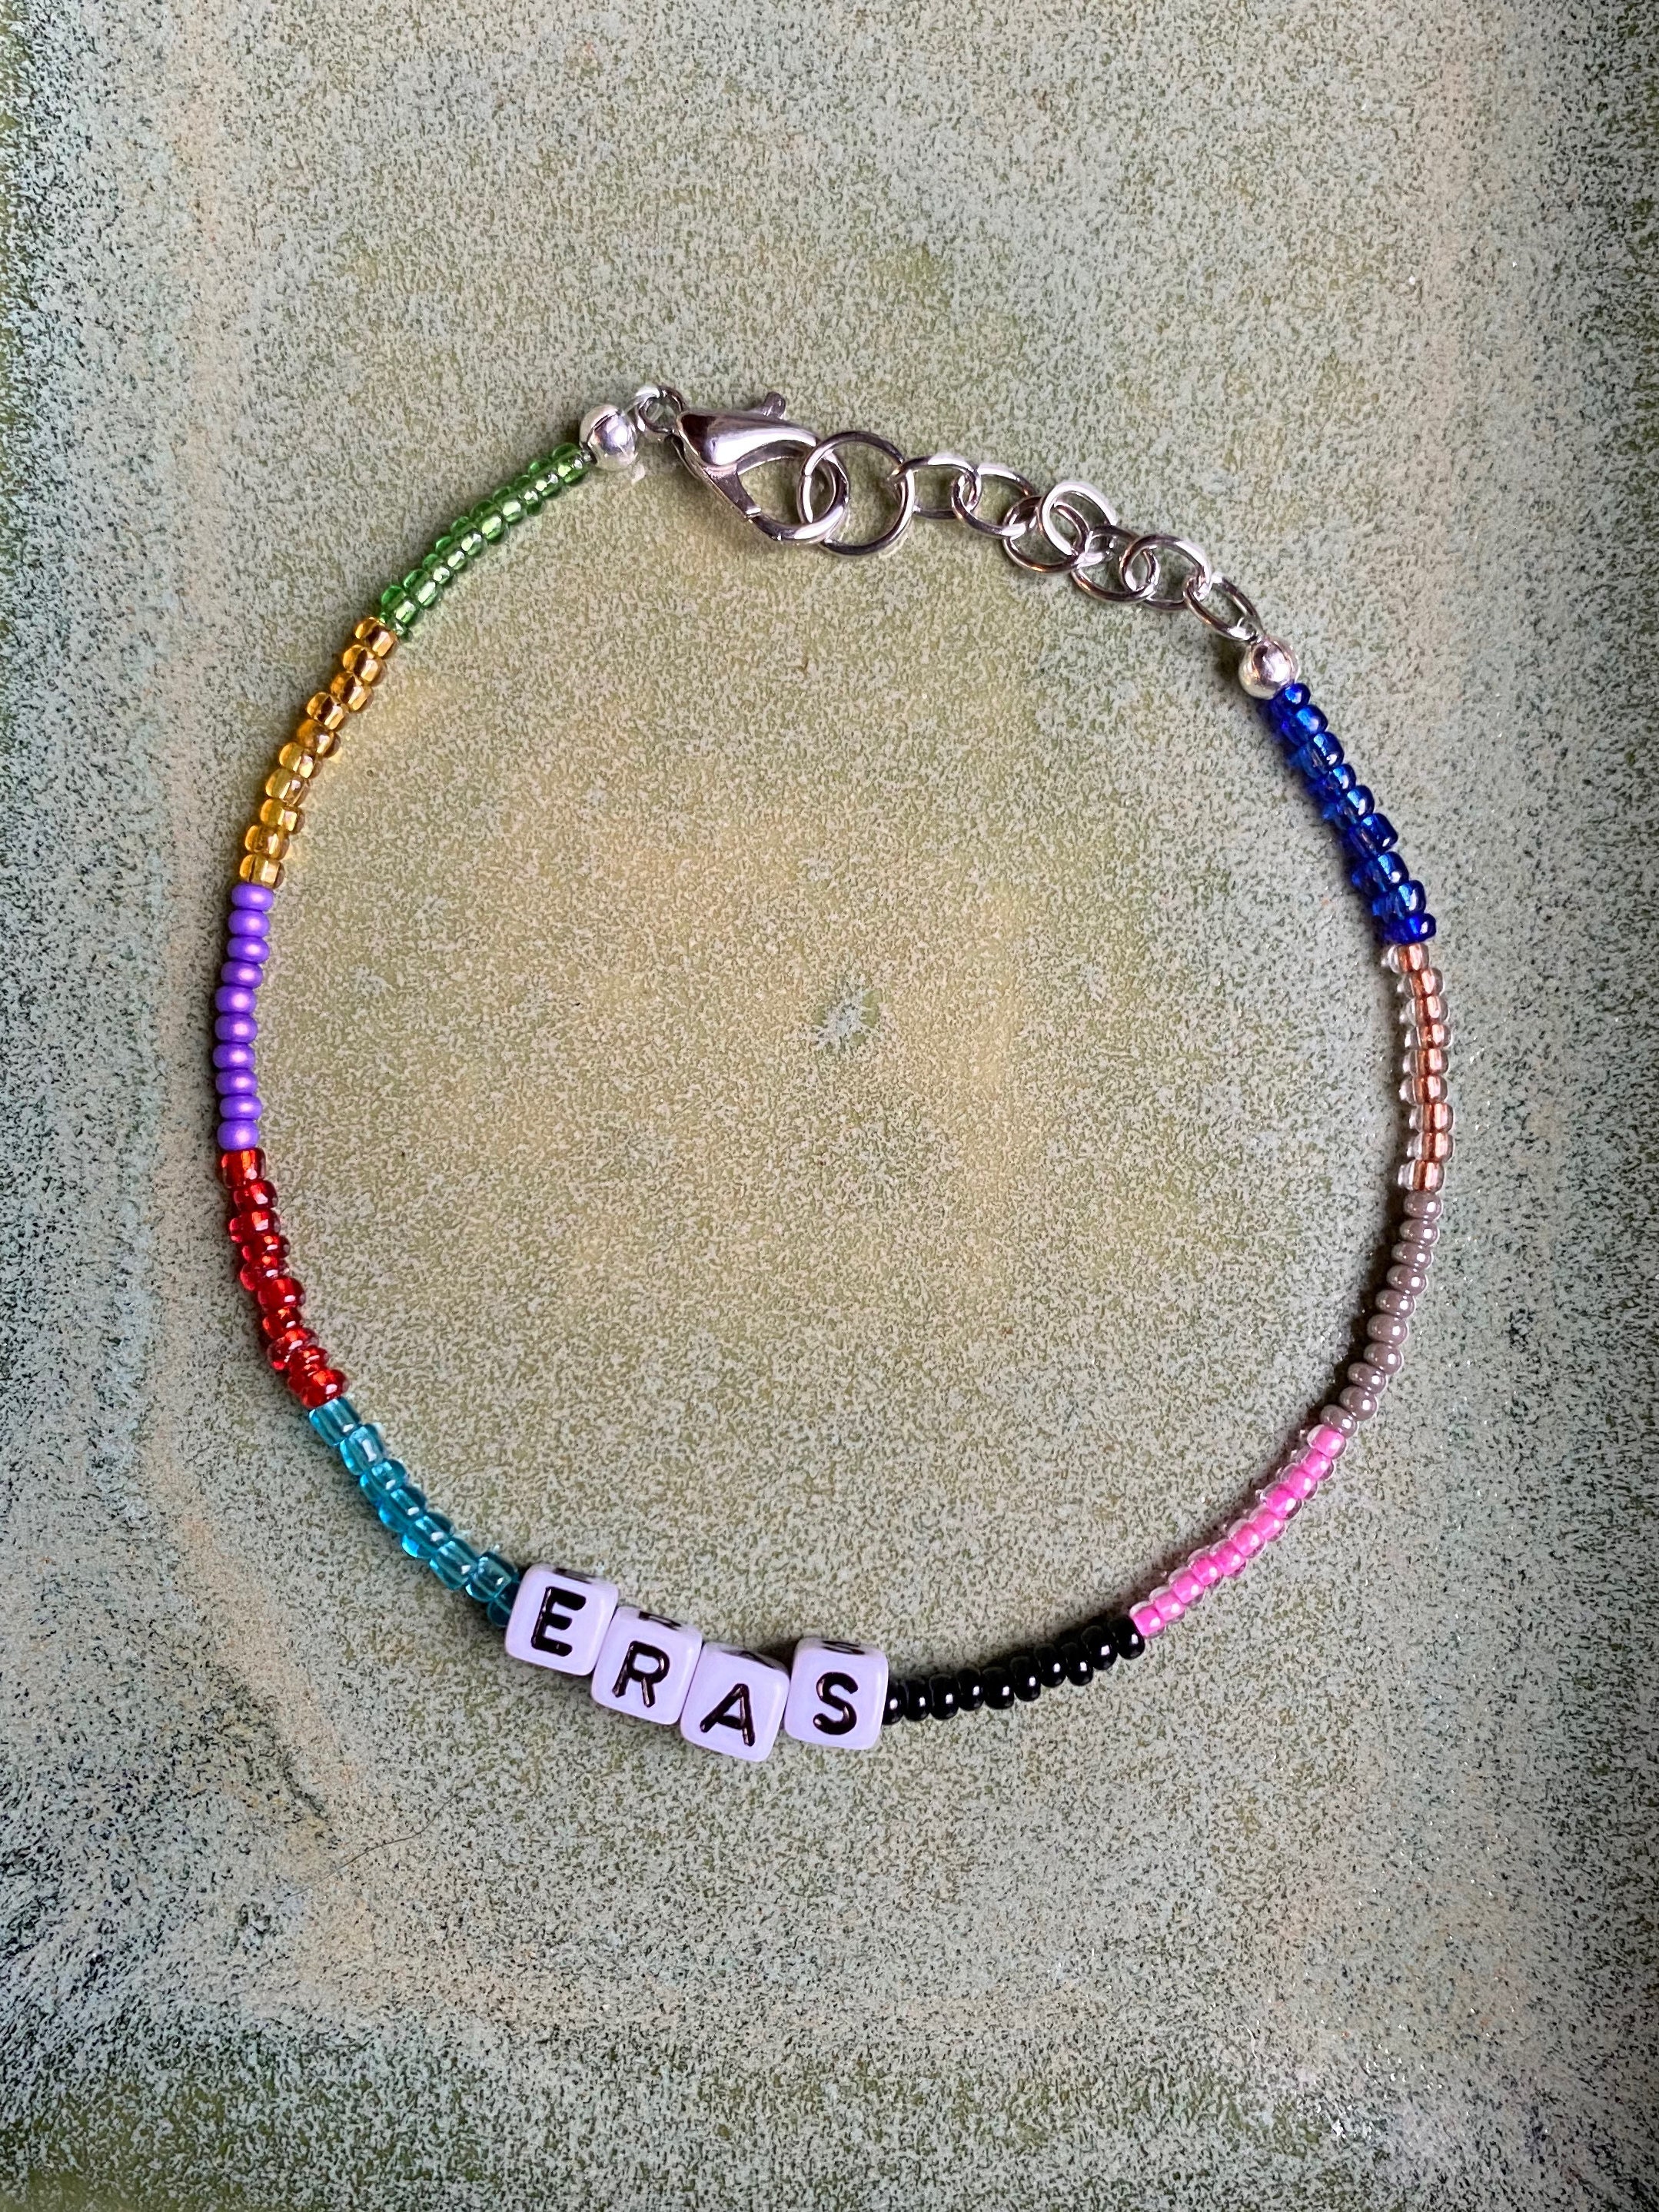 Where to Buy Jewelry Making Kits to Make Friendship Bracelets for Taylor  Swift's The Eras Tour – fresh pair of iis